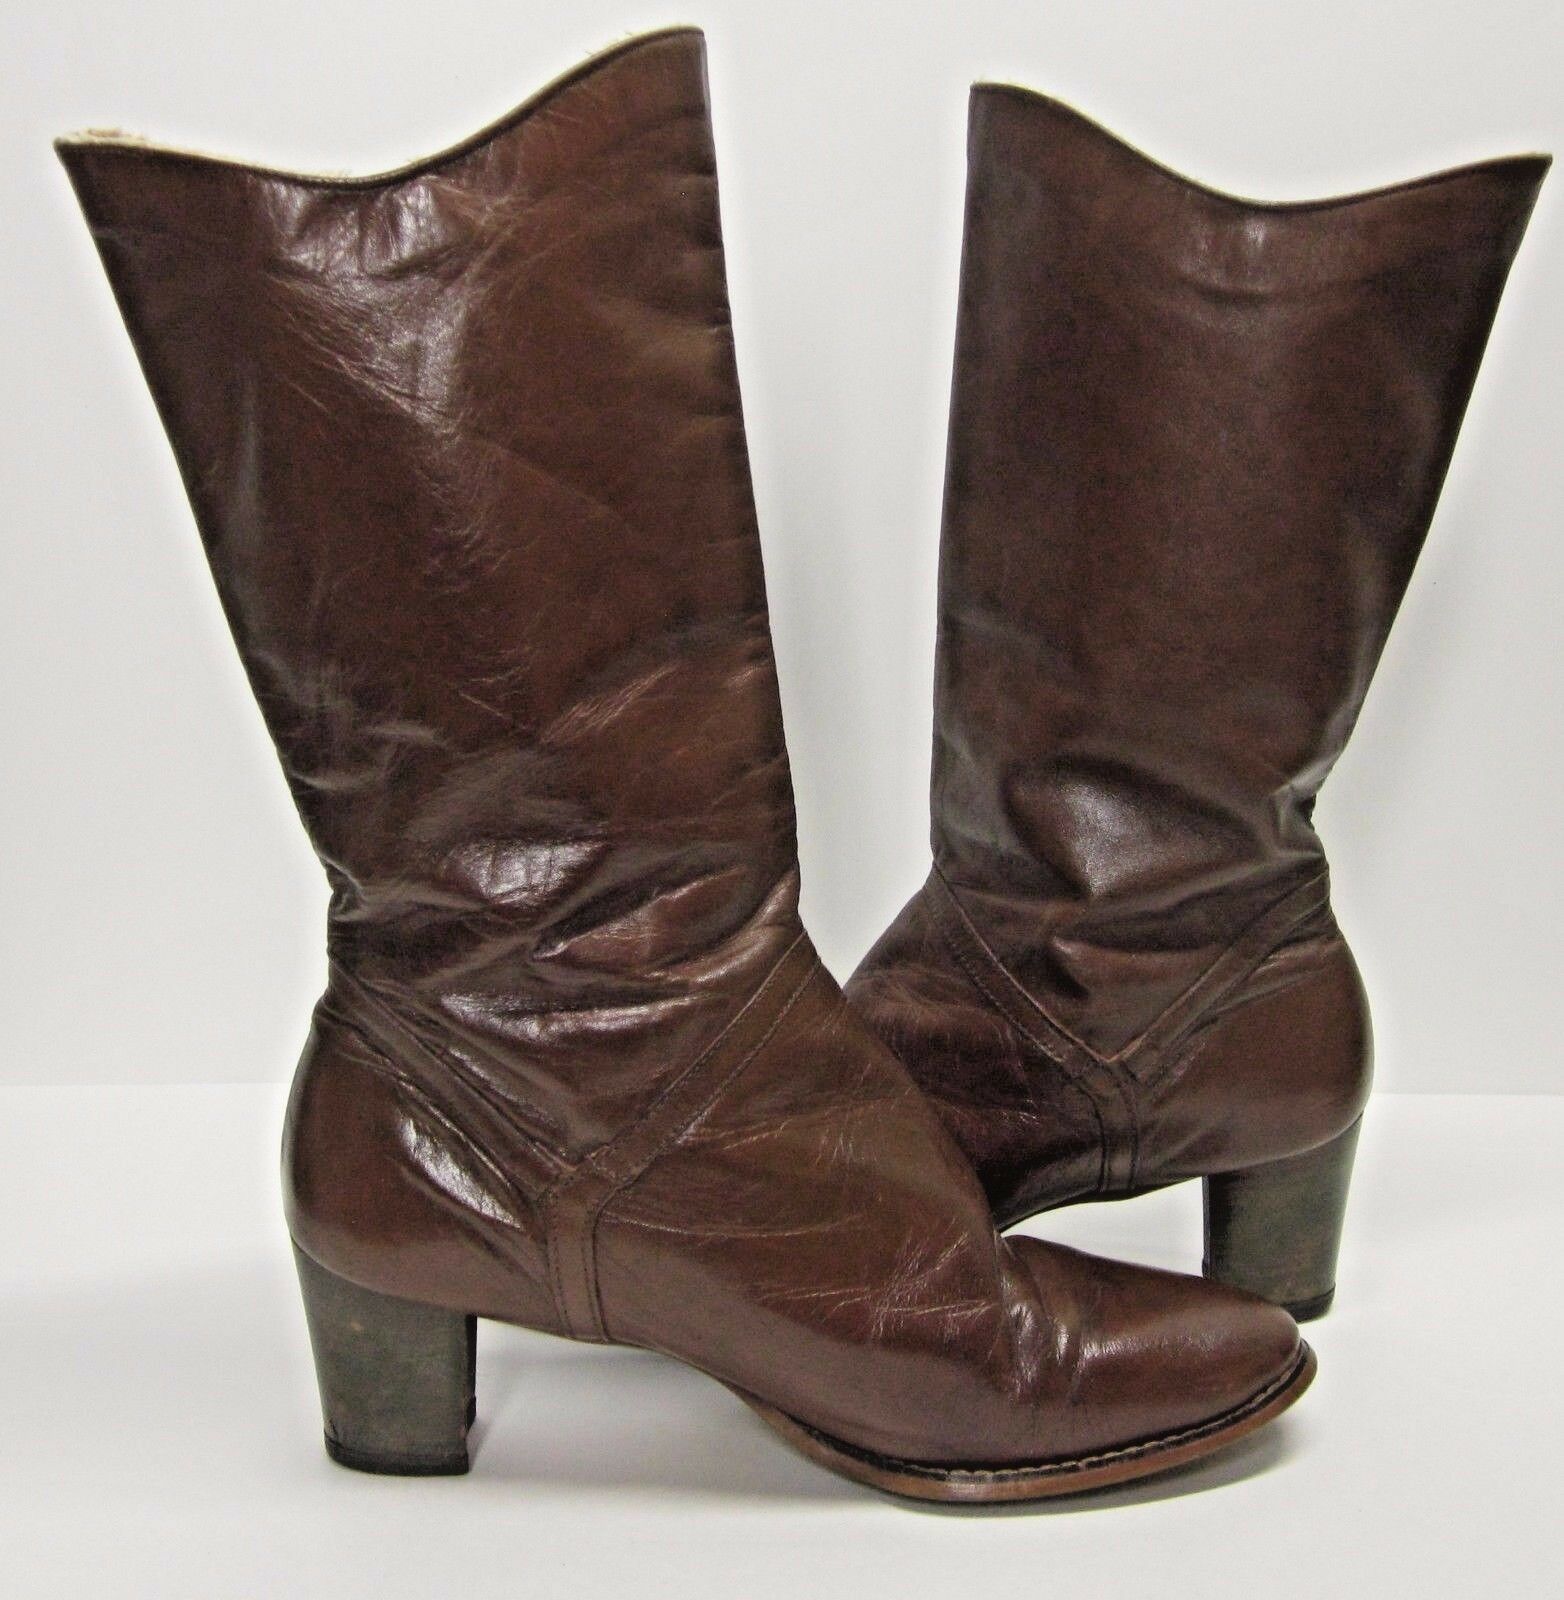 CHOCOLATE BROWN SUPPLE LEATHER MID CALF HARNESS BOOTS WOMEN'S SZ (9M ...